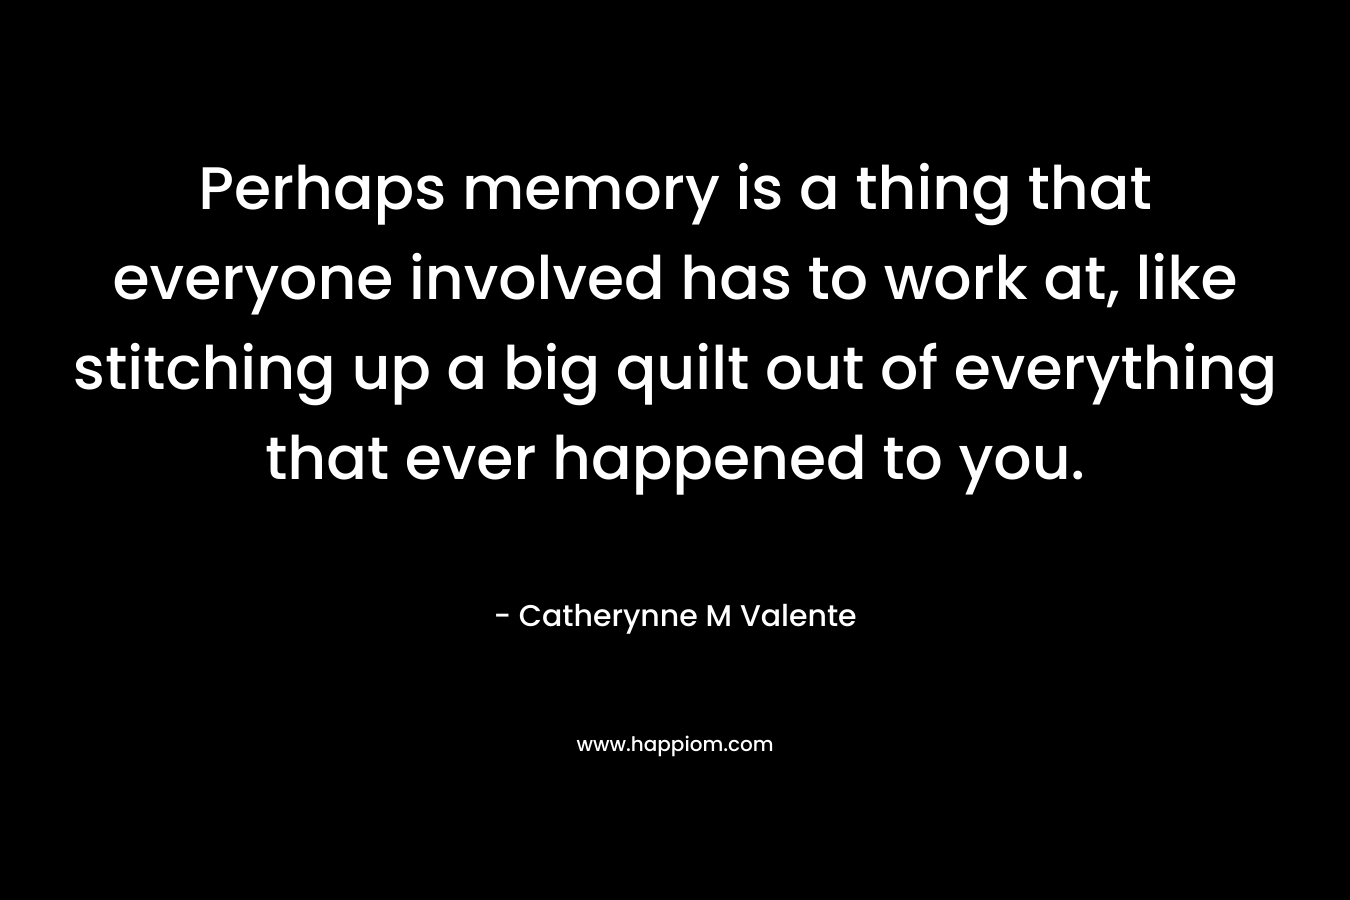 Perhaps memory is a thing that everyone involved has to work at, like stitching up a big quilt out of everything that ever happened to you. – Catherynne M Valente